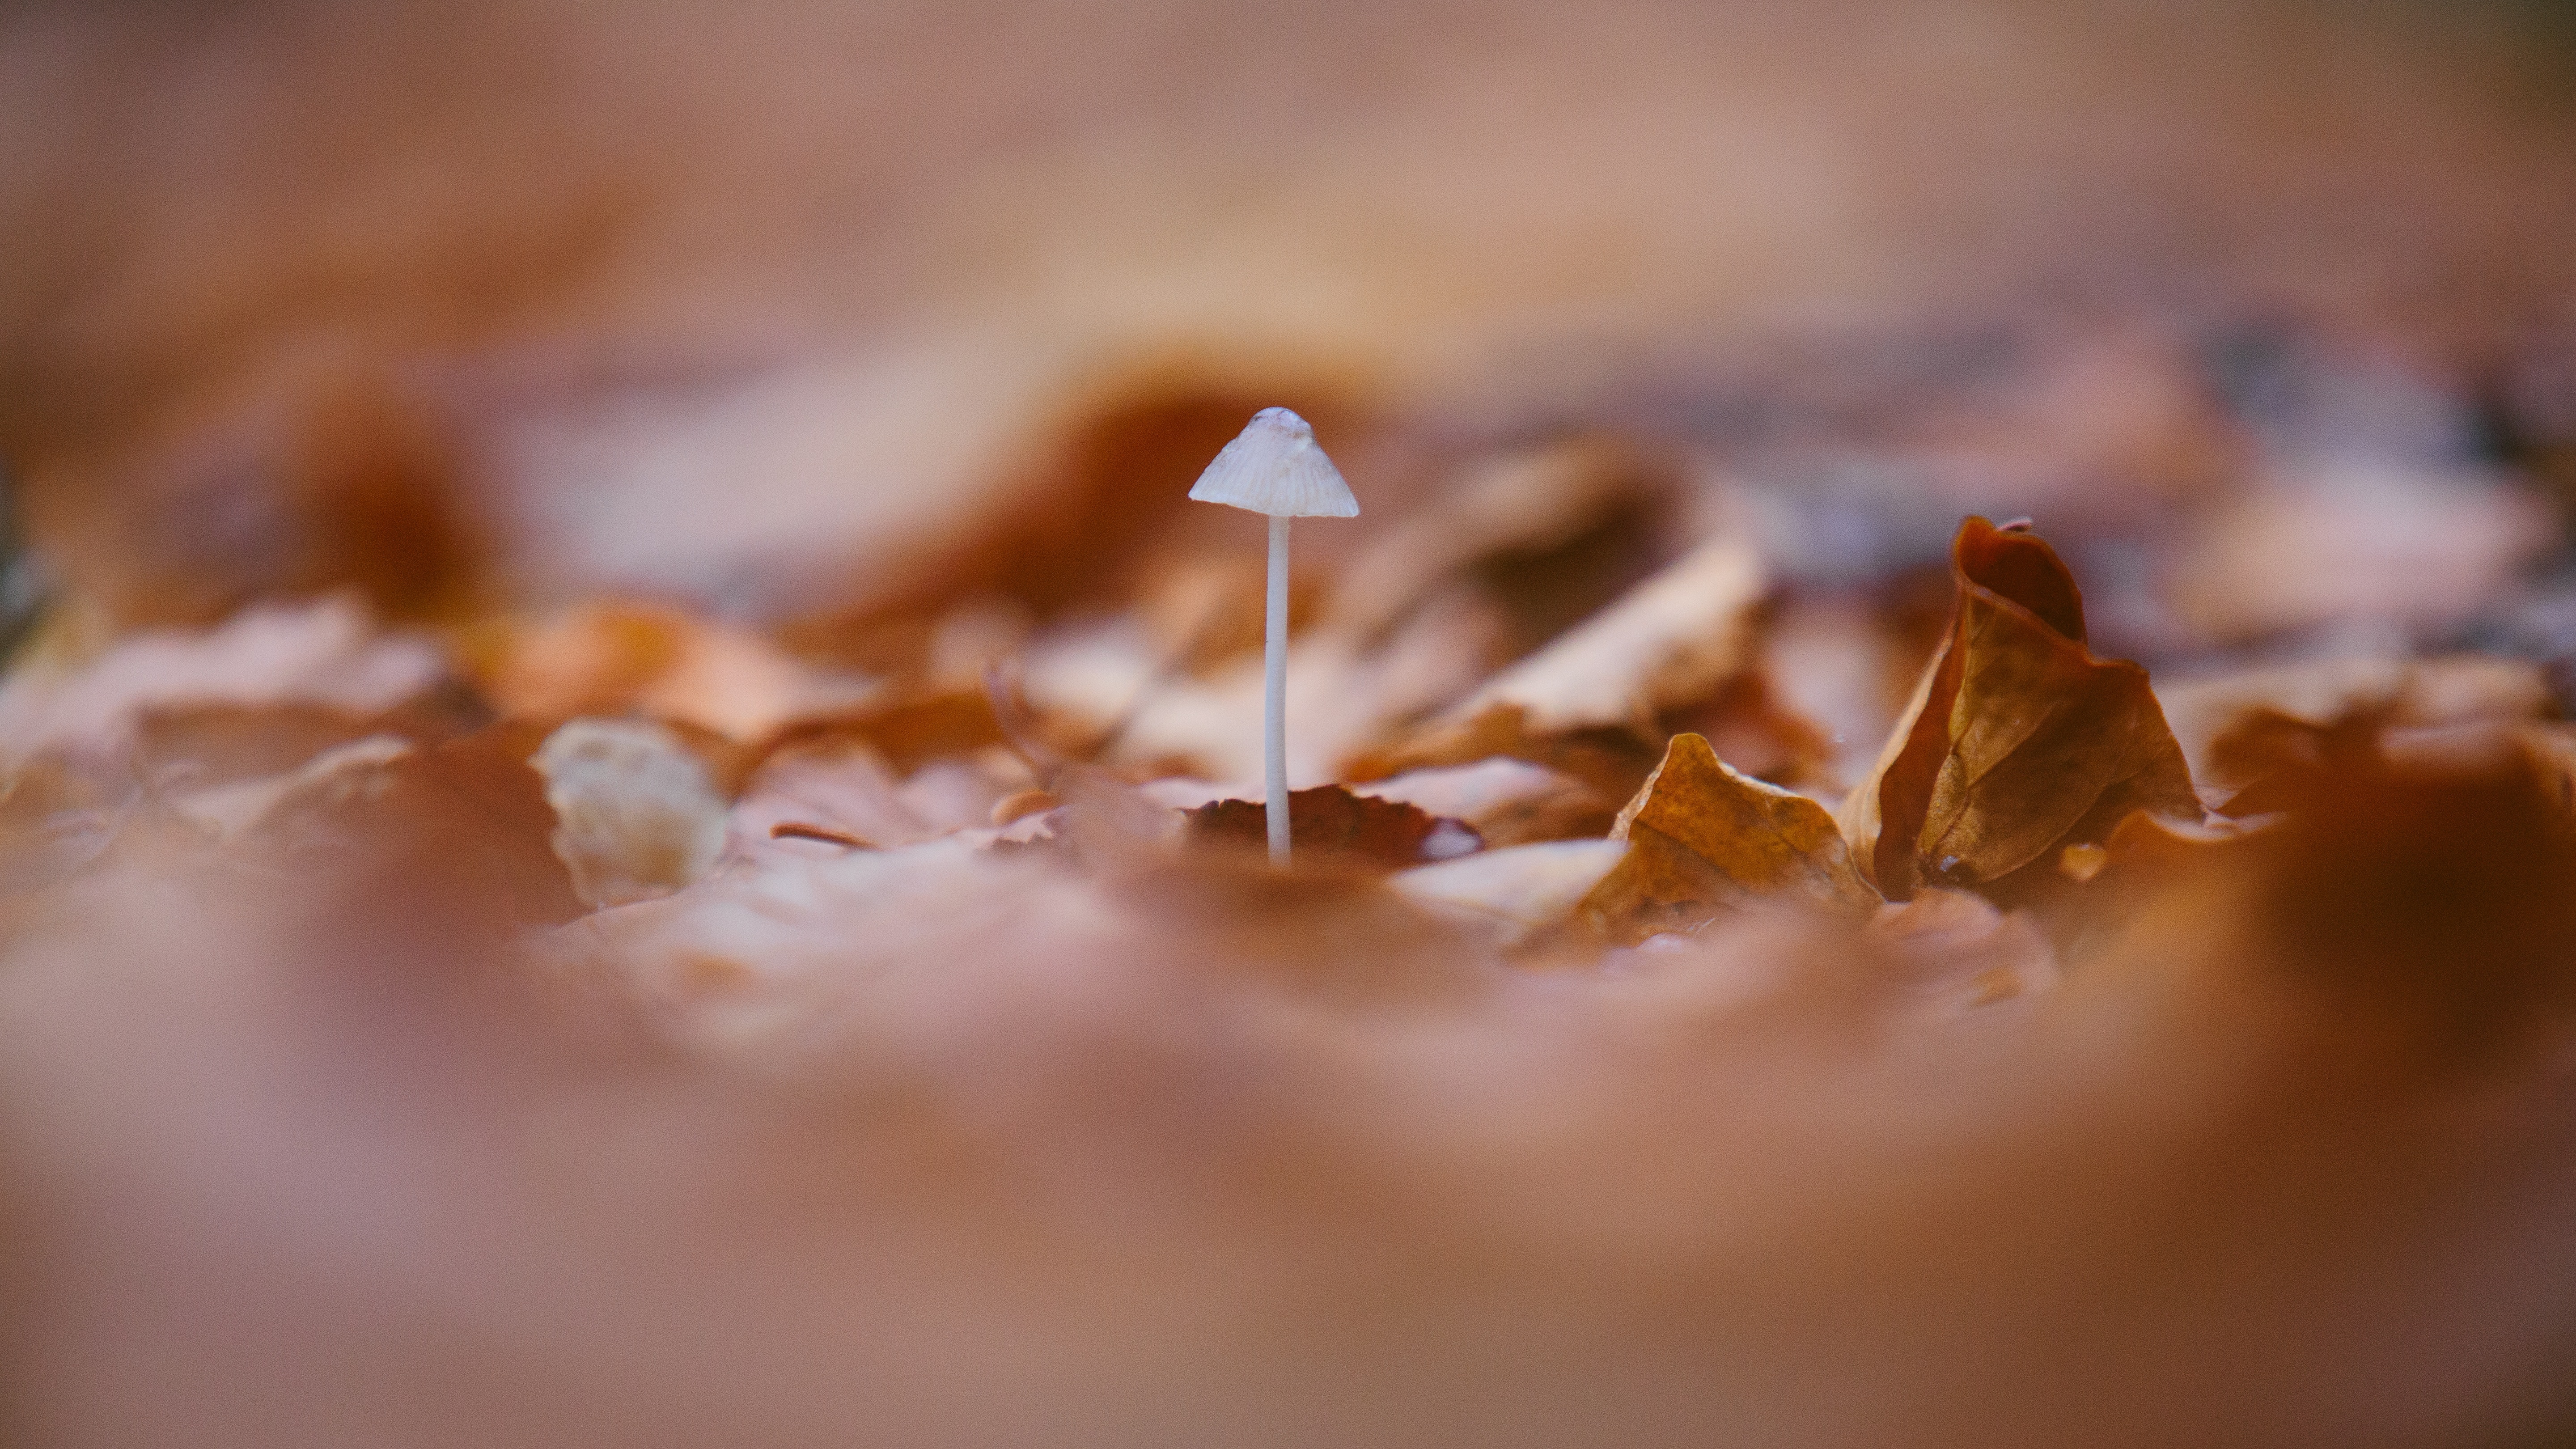 selective focus photography of a mushroom surrounded by brown fallen leaves